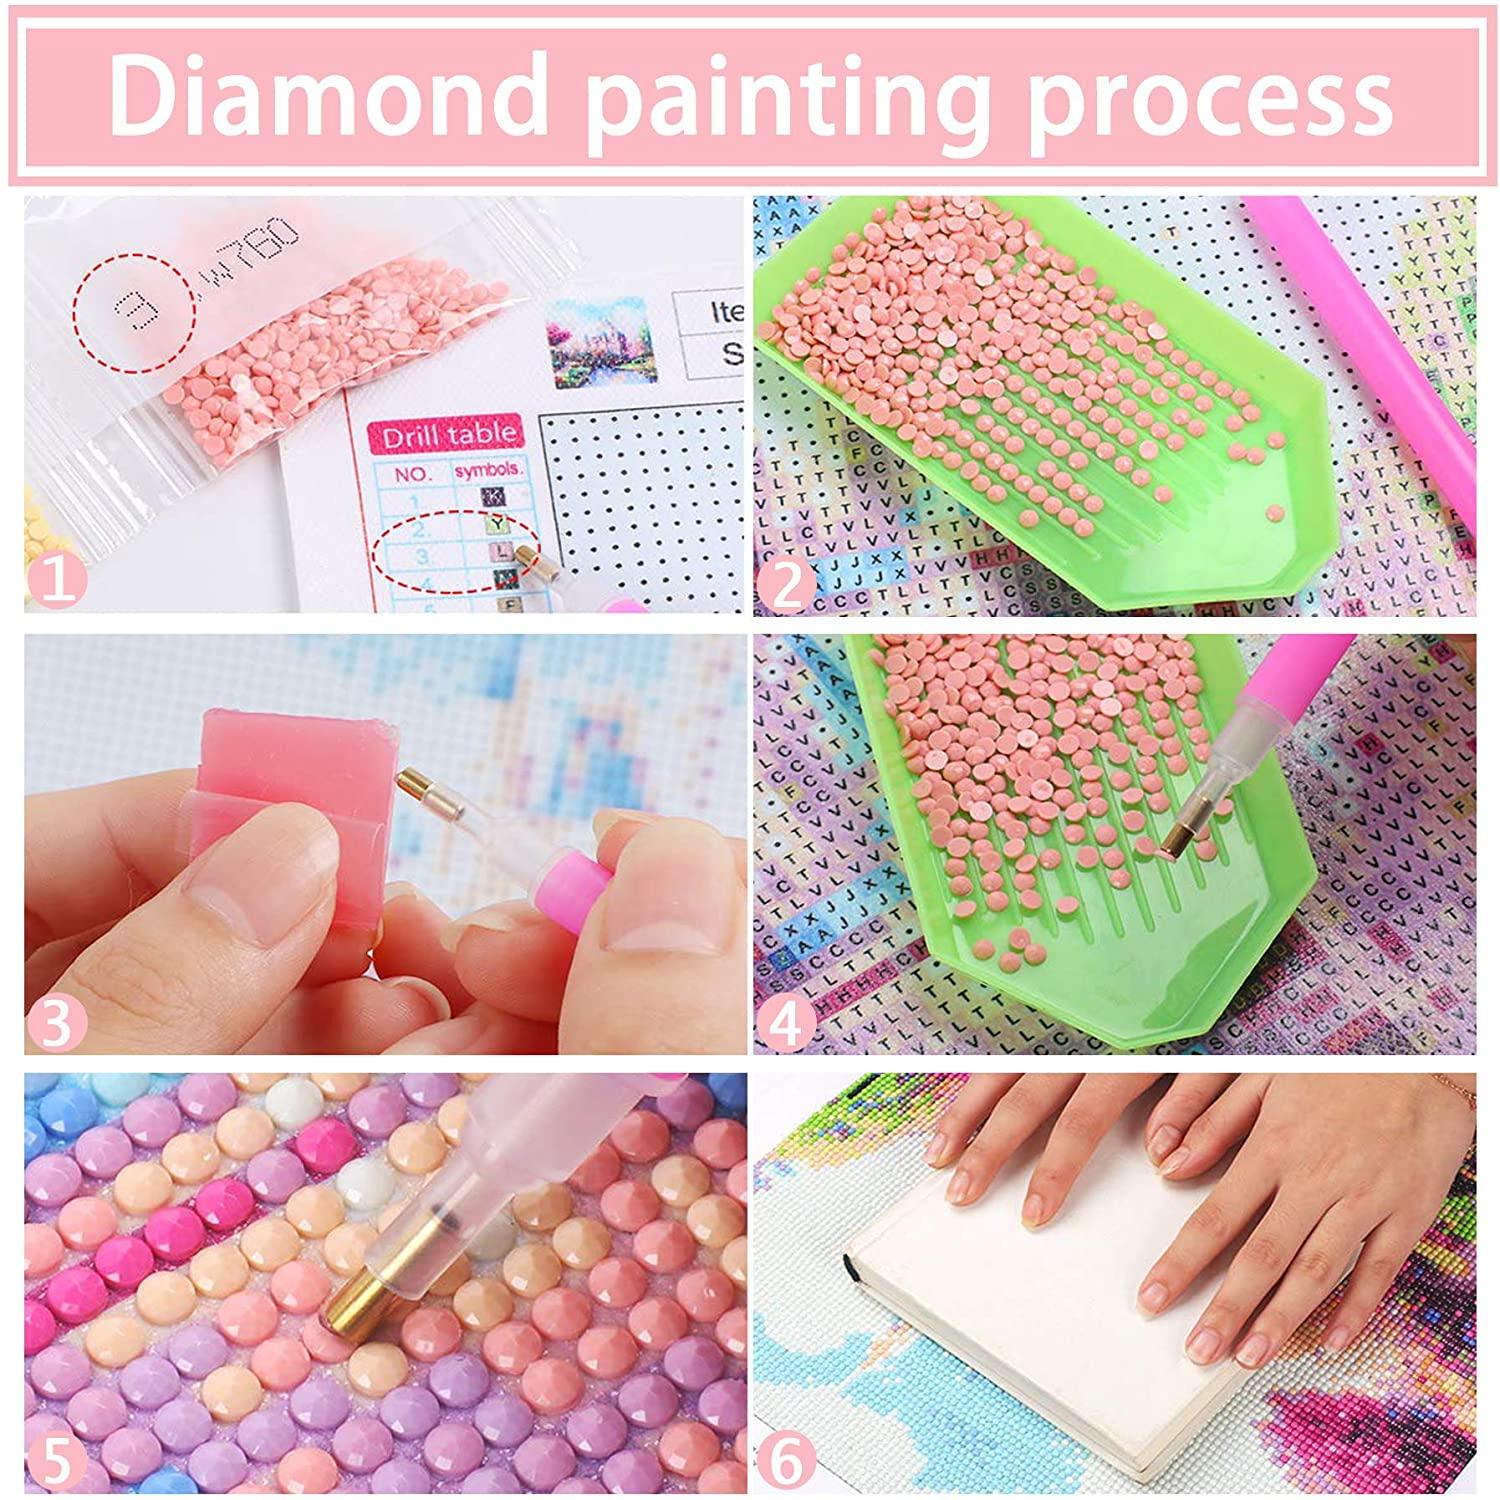 Bimkole 5D Diamond Painting Love Letters Full Drill by Number Kits DIY Rhinestone Pasted 12x16inch